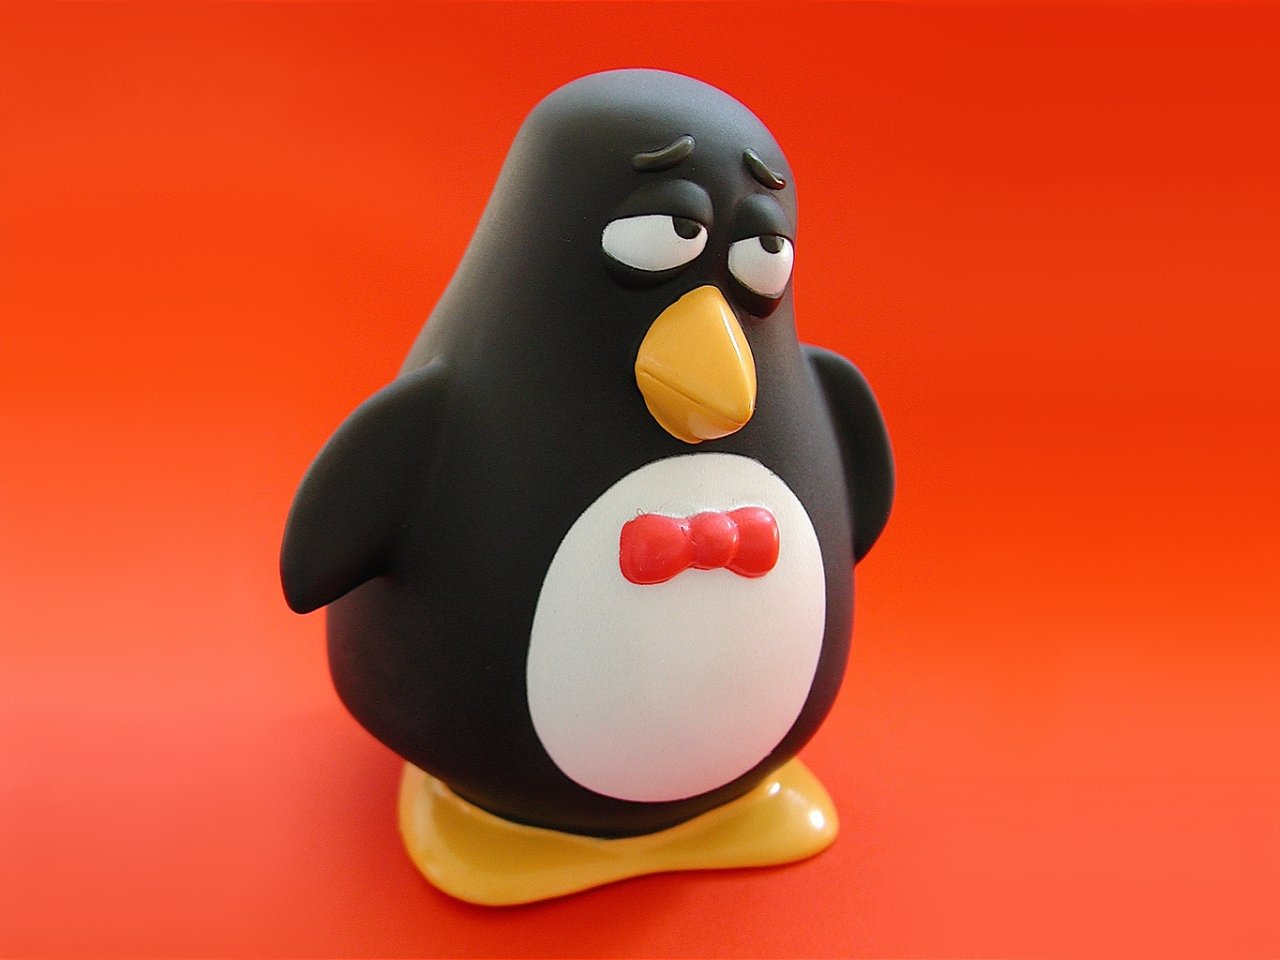 Toy-Story-Wheezy picture, Toy-Story-Wheezy photo, Toy-Story-Wheezy